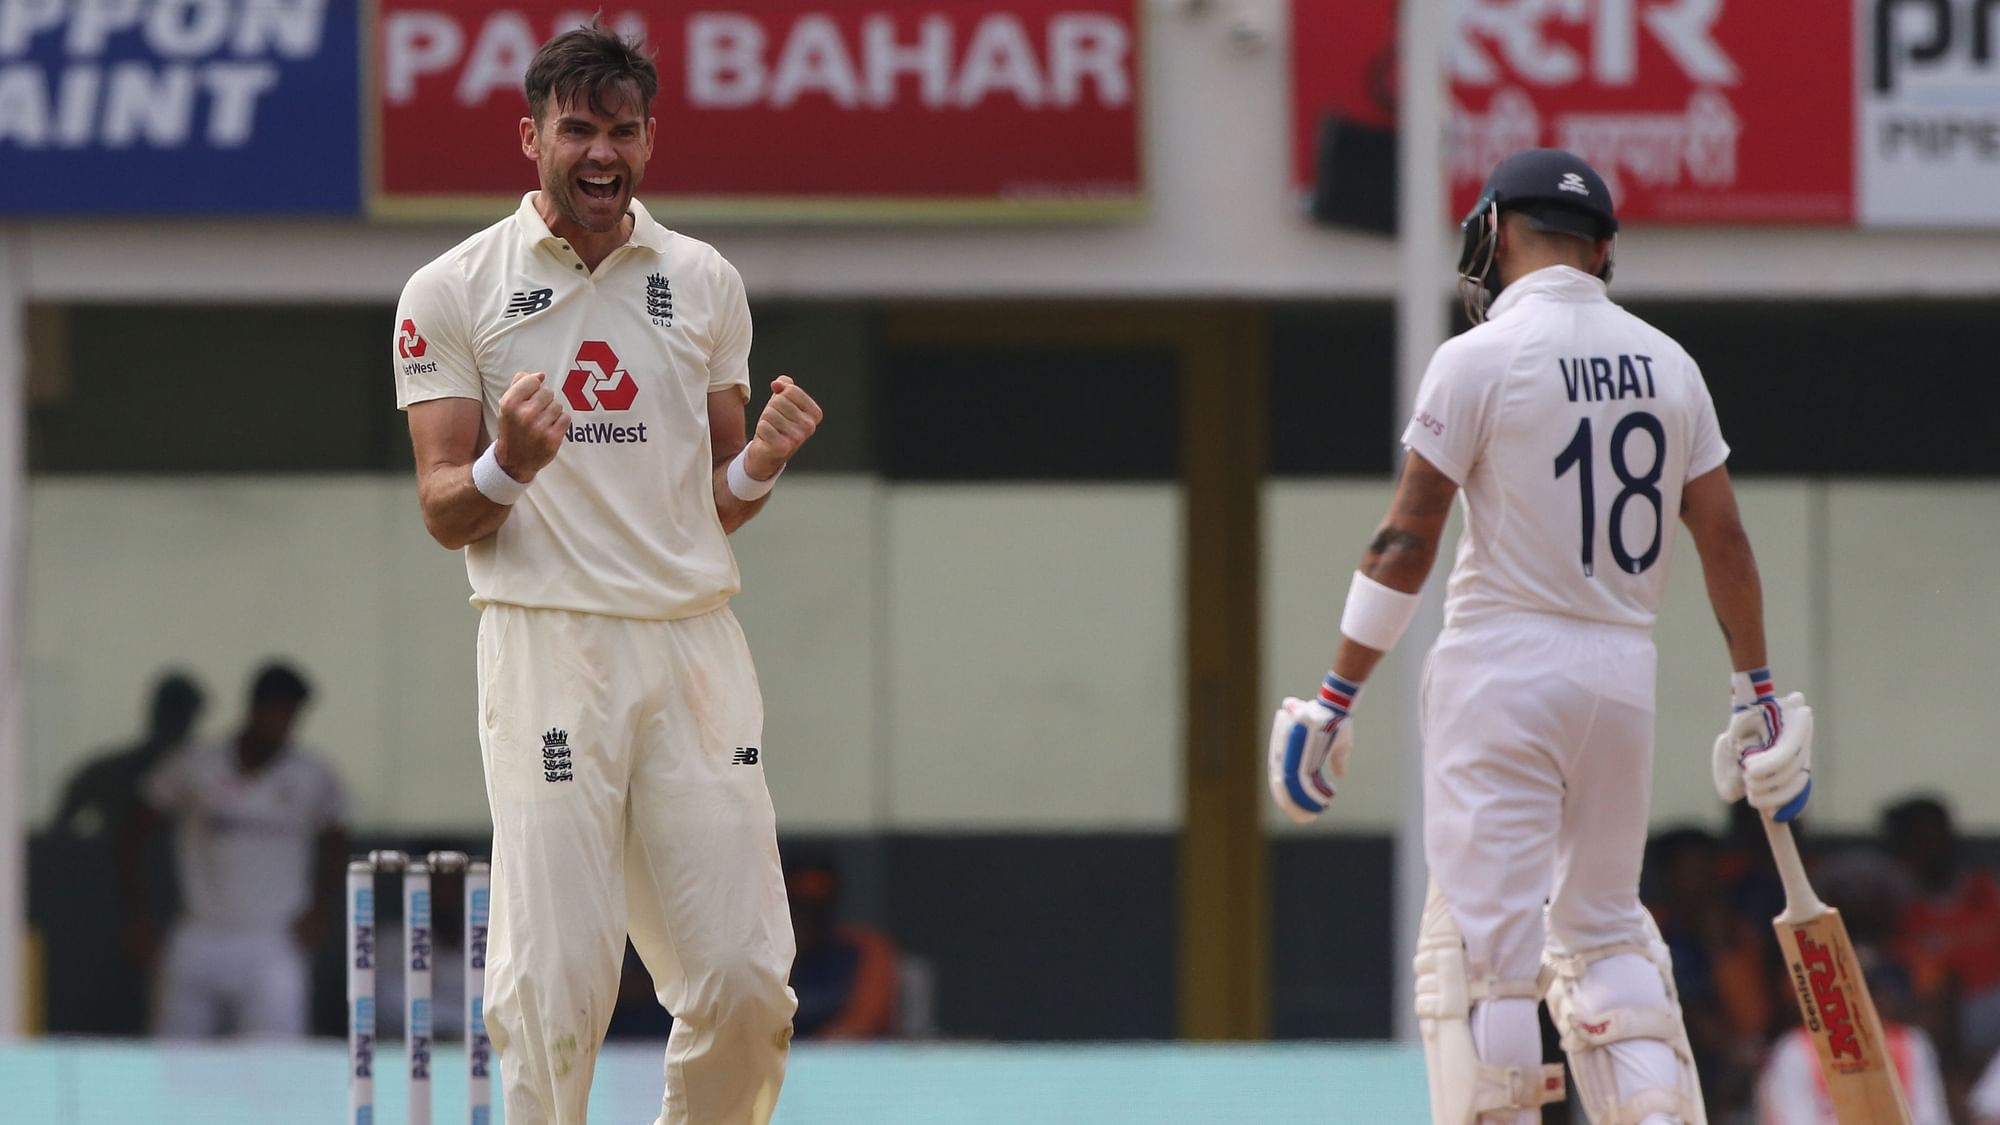 James Anderson celebrates a wicket against India in the Chennai Test.